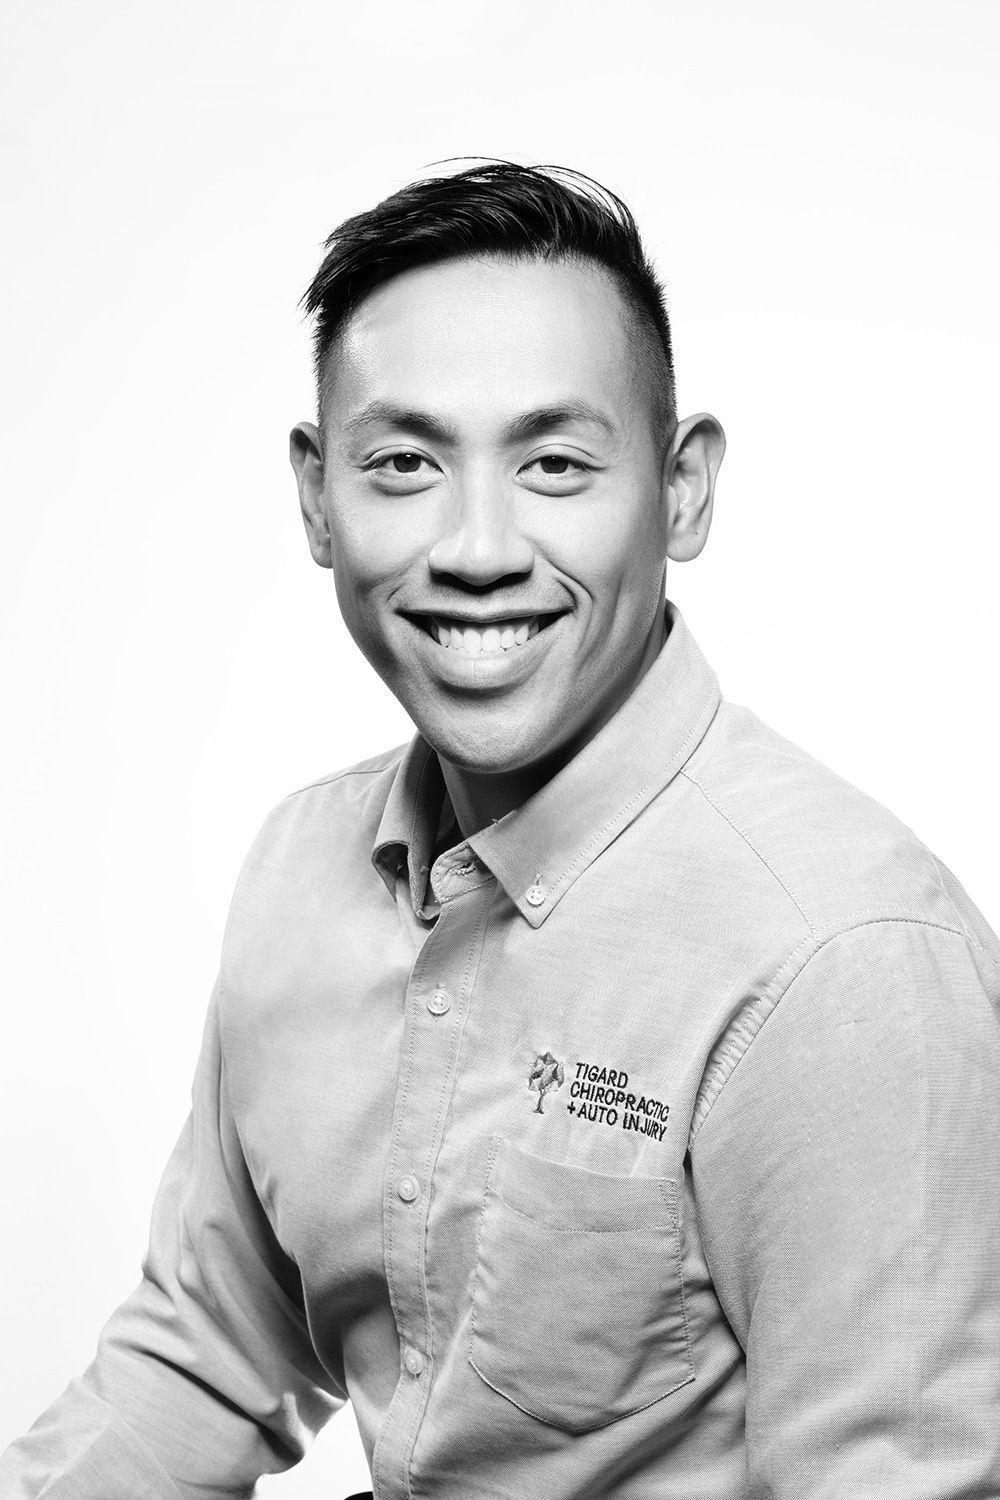 A black and white photo of a smiling man wearing a shirt.